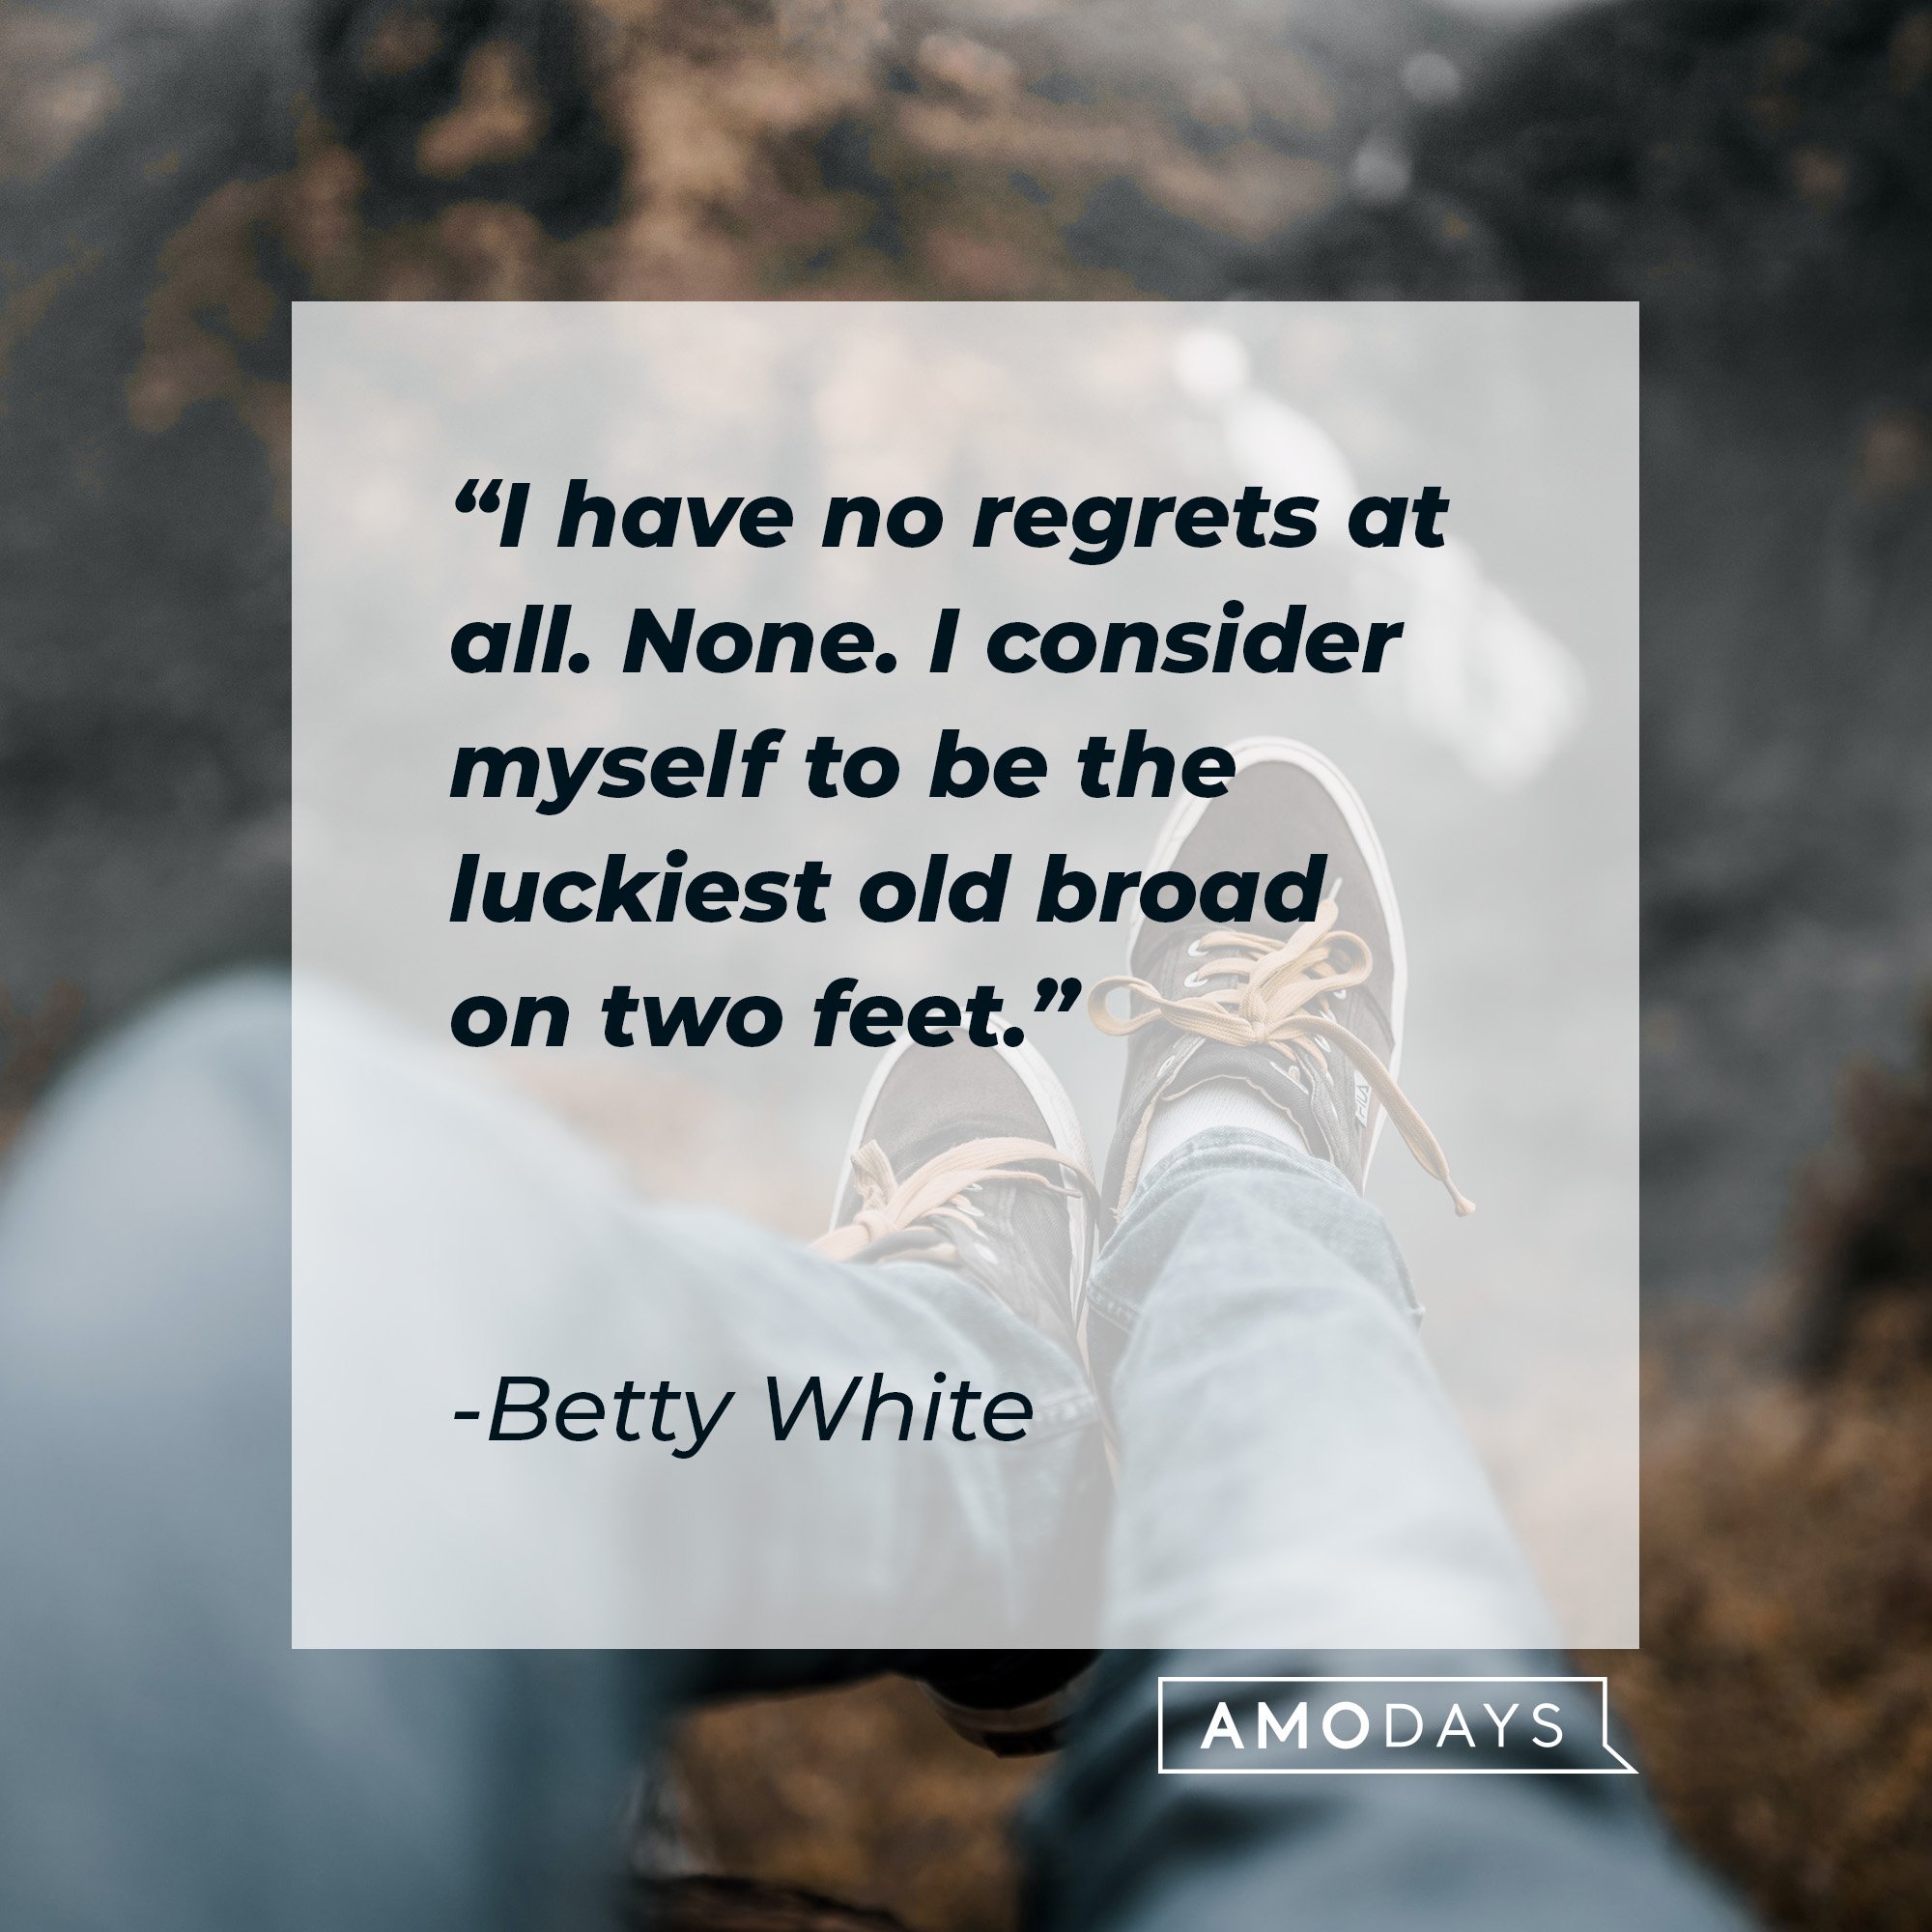 Betty White’s quote: "I have no regrets at all. None. I consider myself to be the luckiest old broad on two feet." | Image: AmoDays 